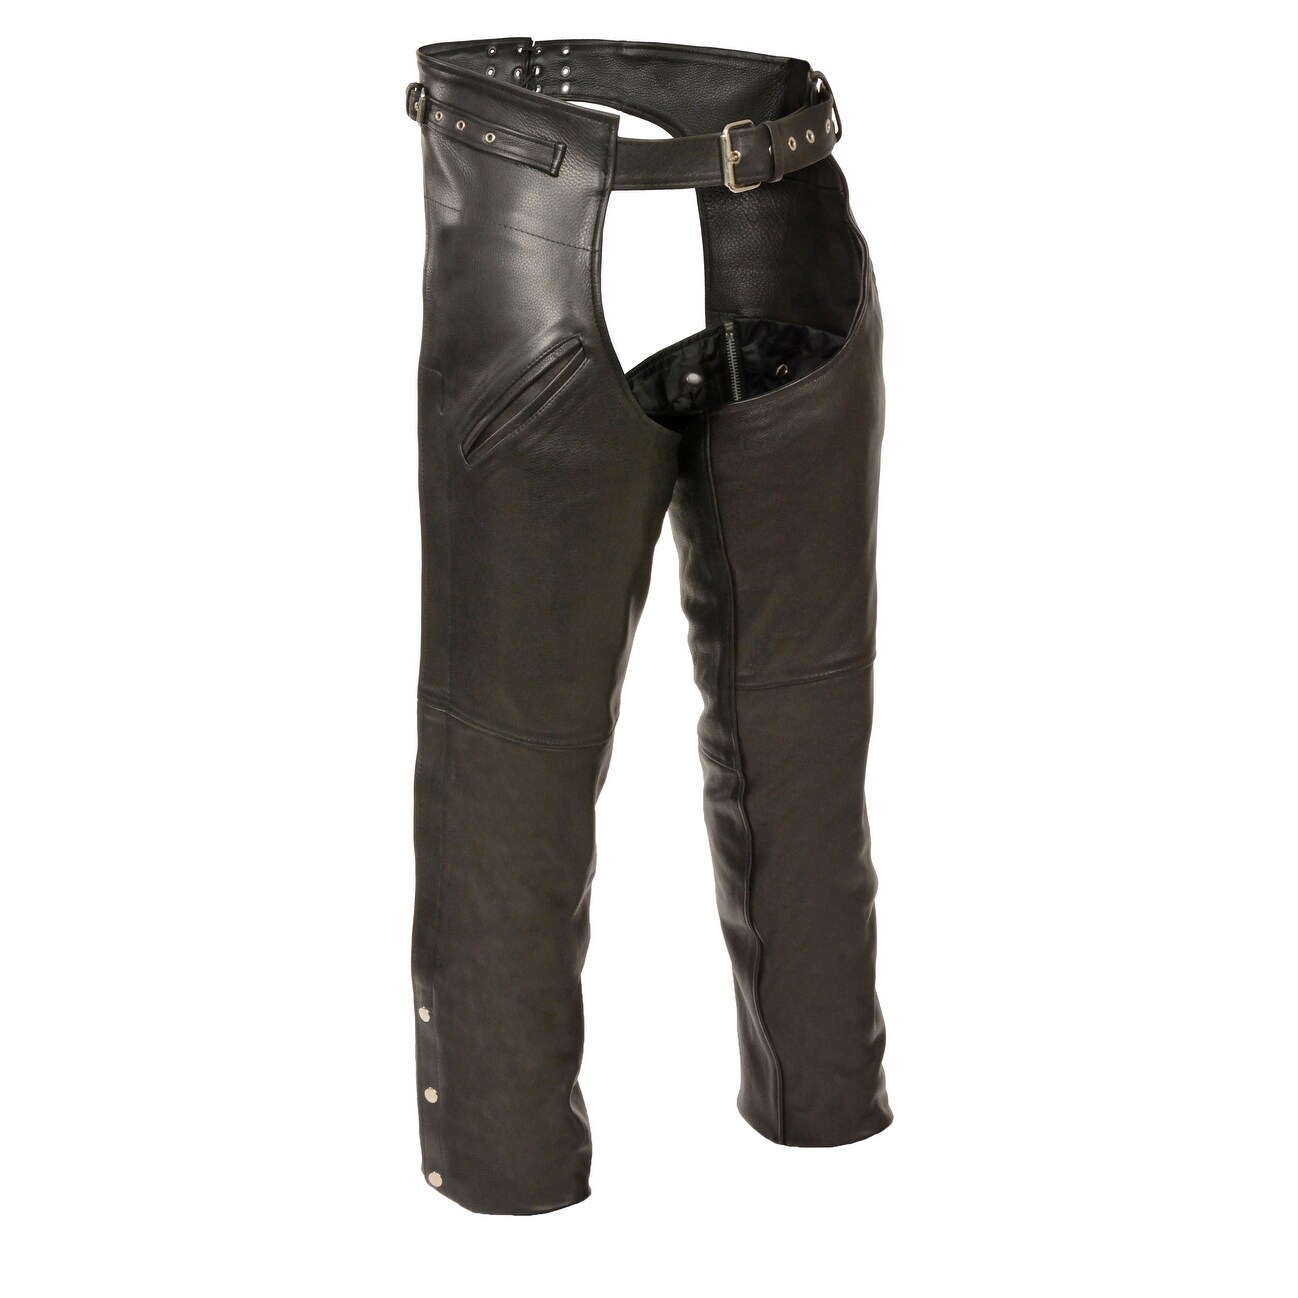 Gun Chaps for sale | Only 3 left at -65%